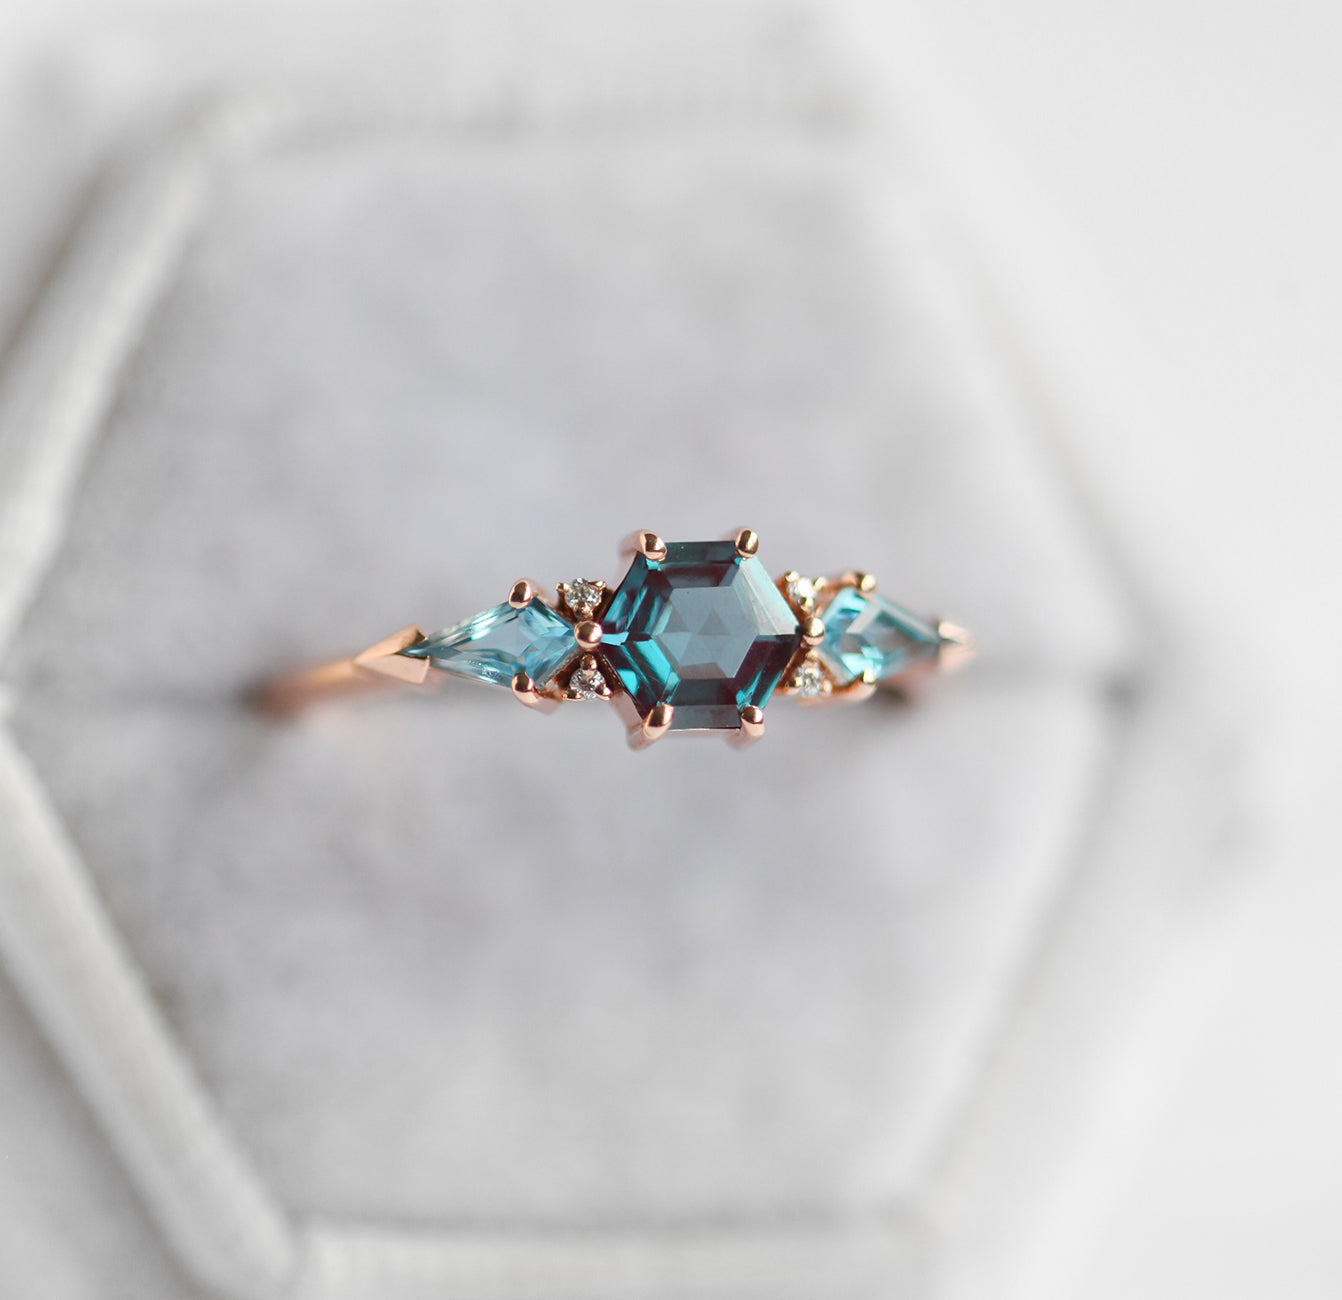 Teal Hexagon Alexandrite Cluster Ring with 2 Side Blue Topaz Stones and 4 White Round Diamonds